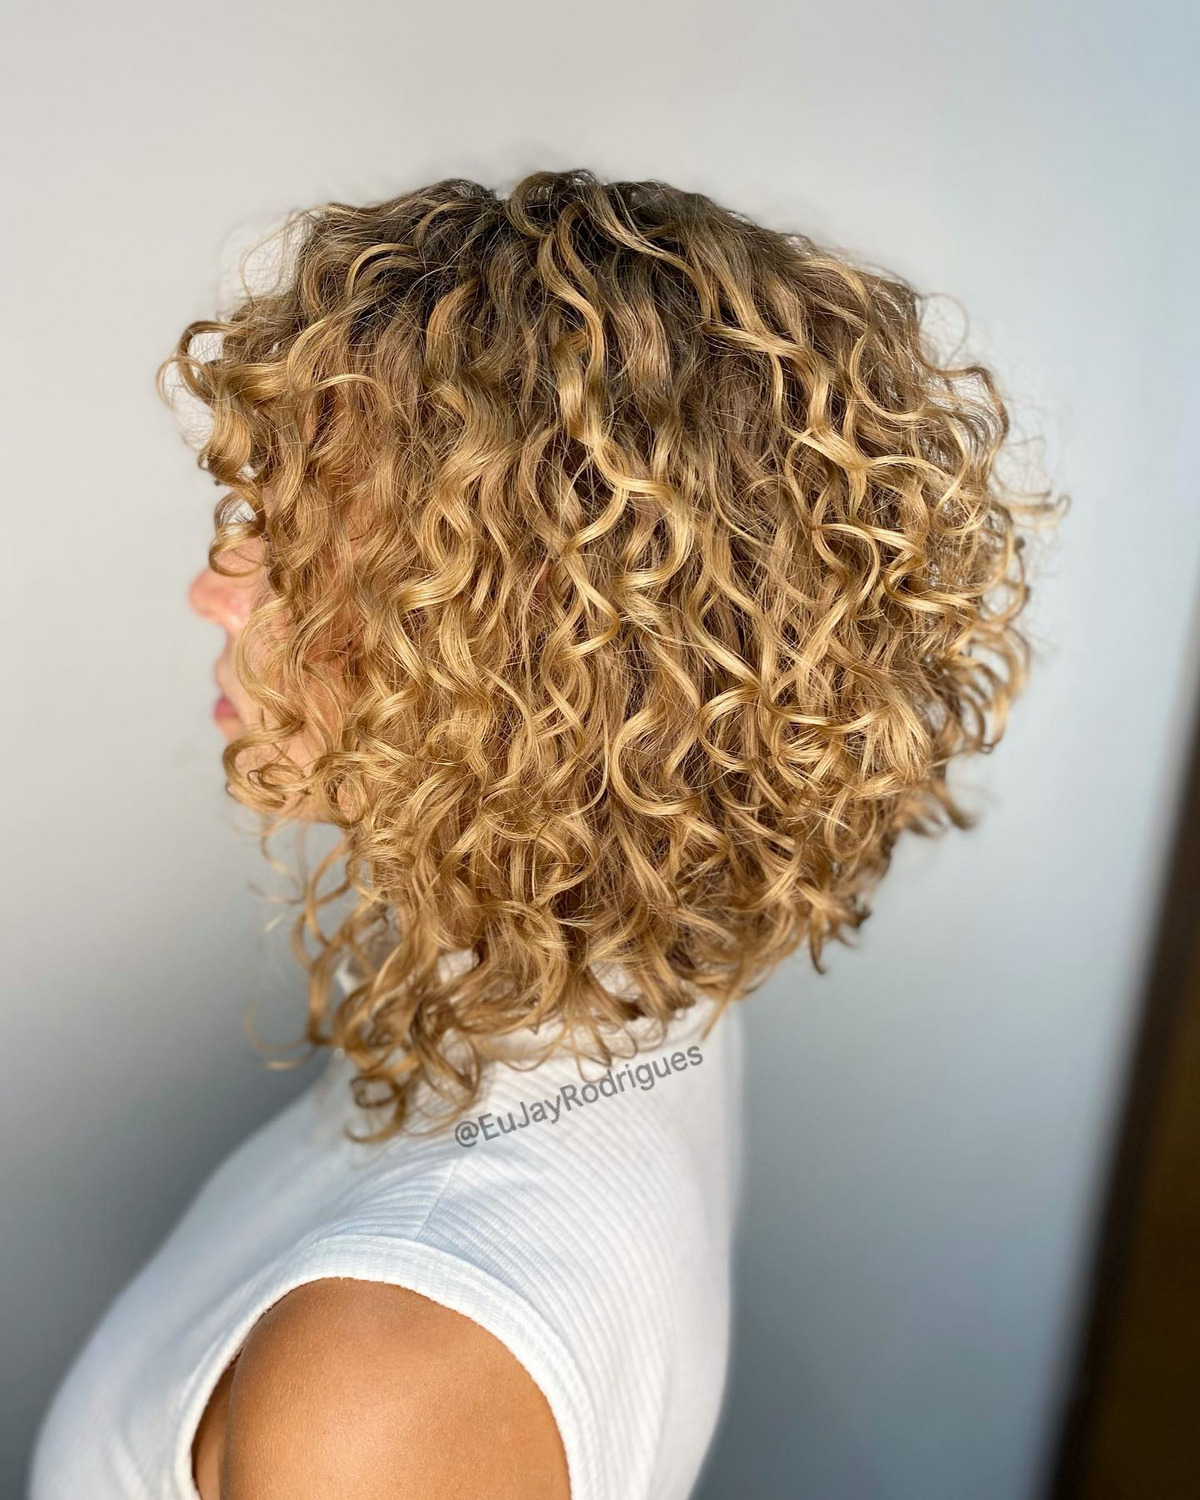 Blonde Curly Bob With Curled Bangs